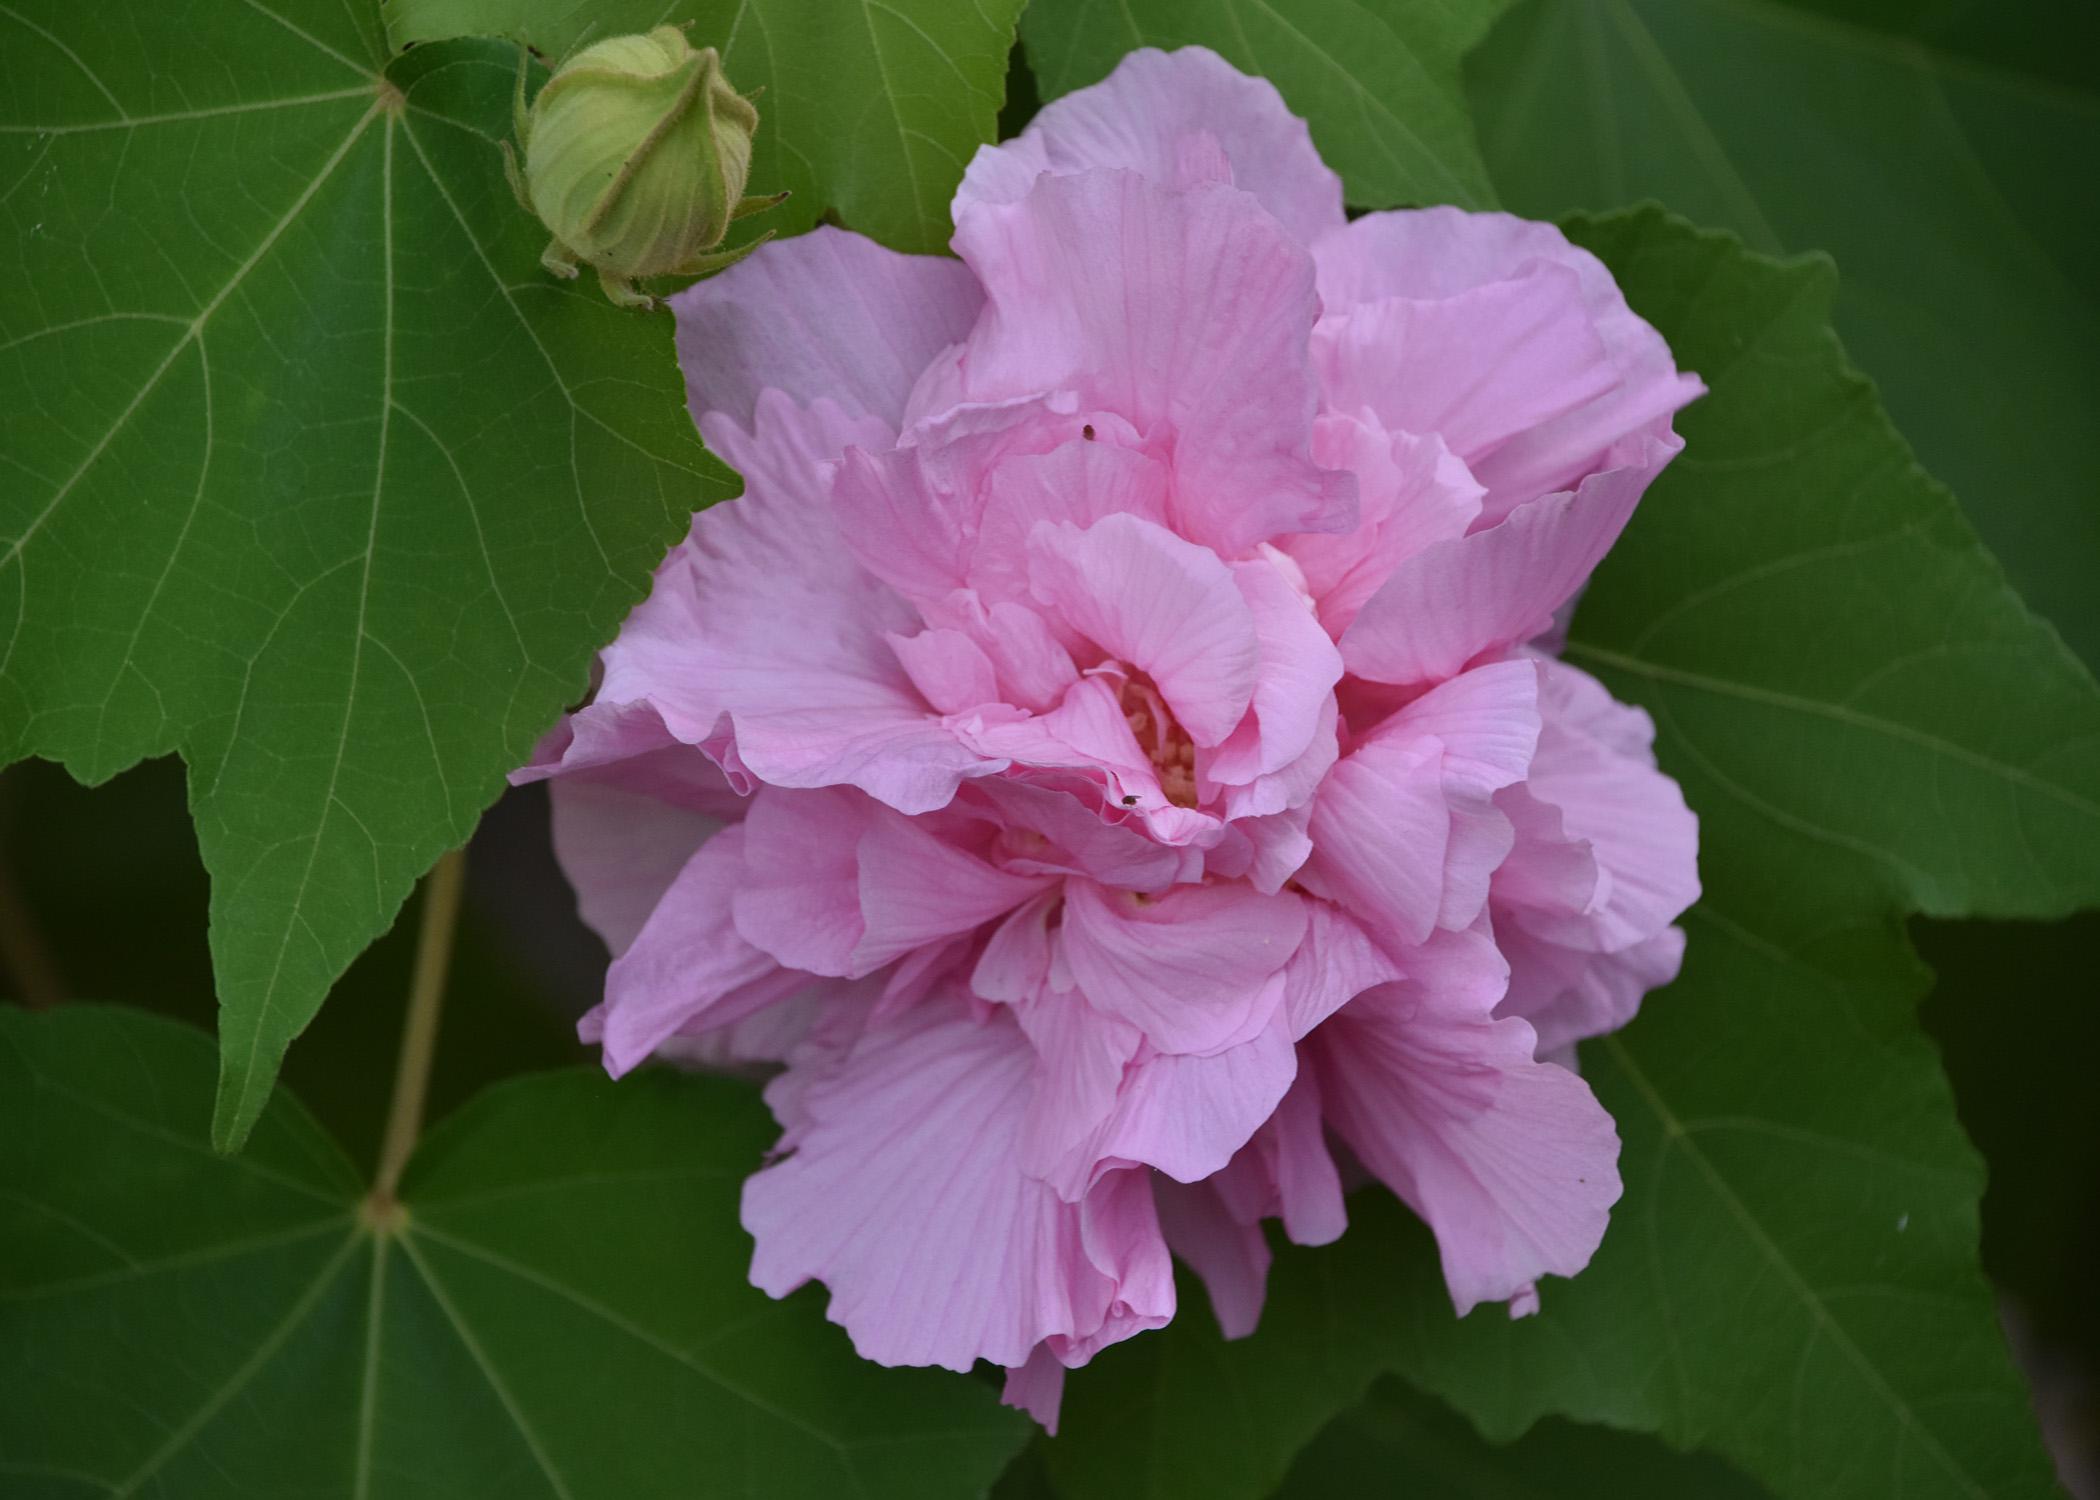 A single pink bloom is surrounded by green leaves.